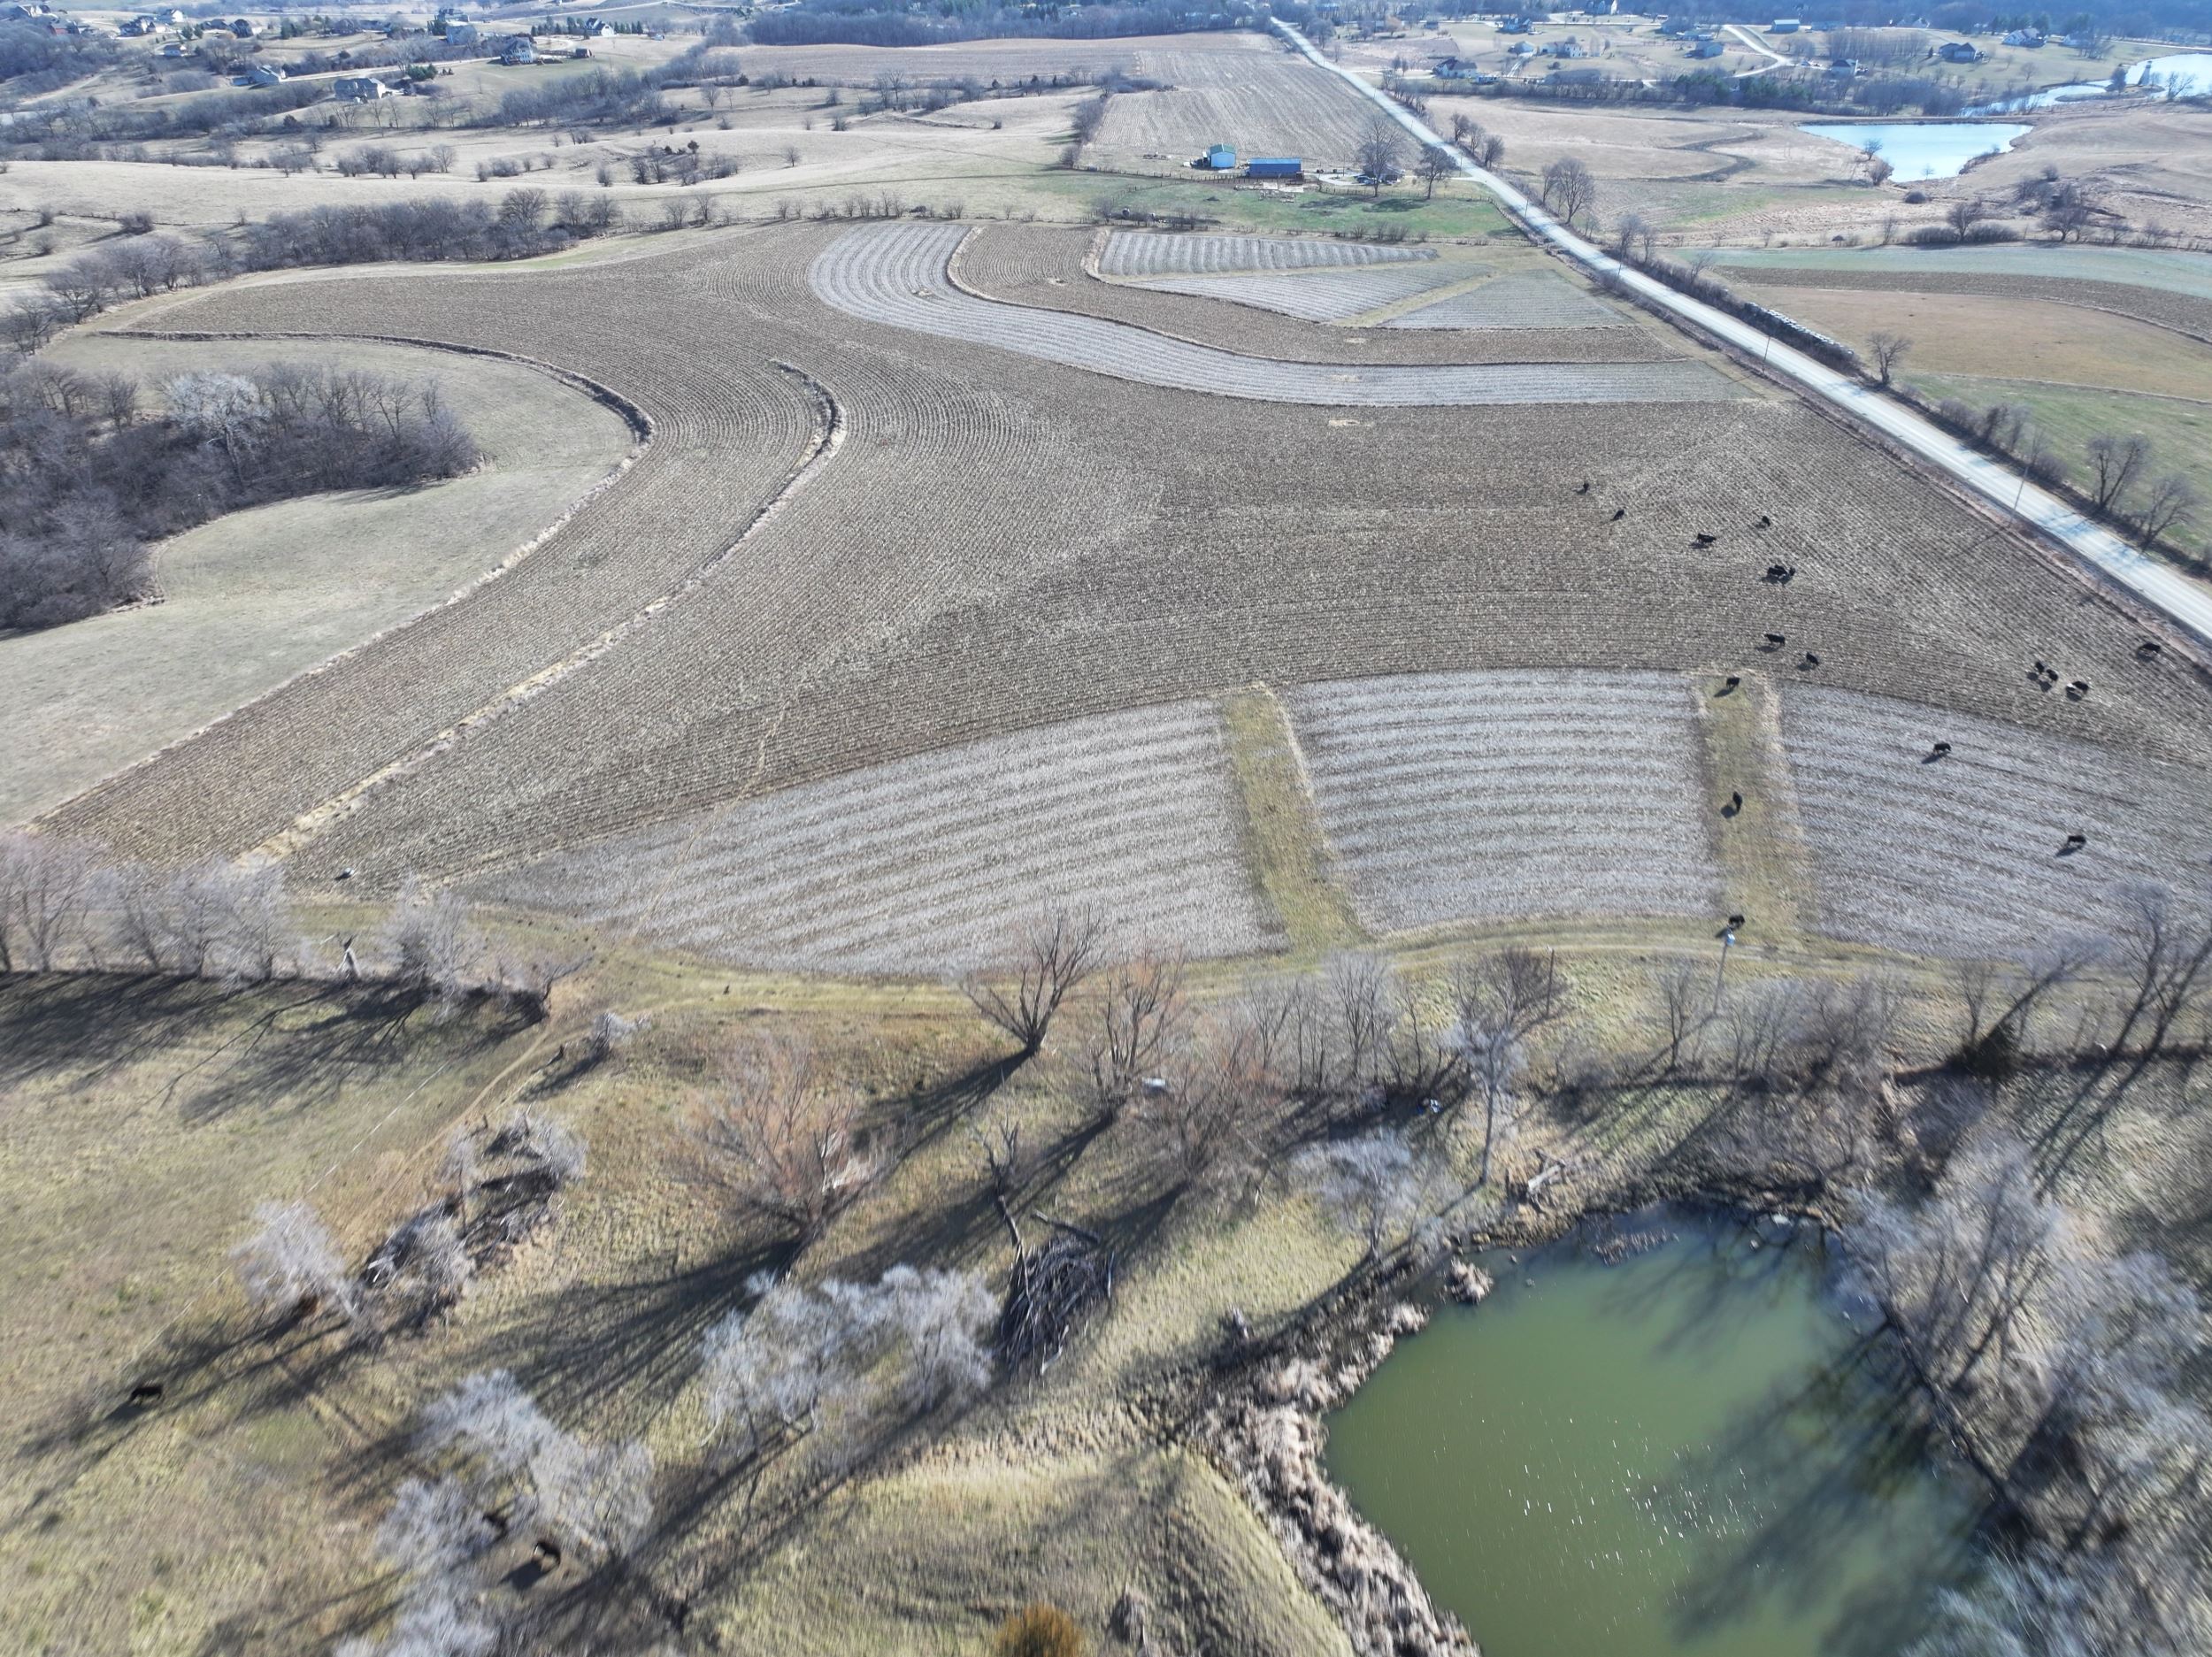 A birds-eye-view shows the diversity of crops and cover planted on the farm.